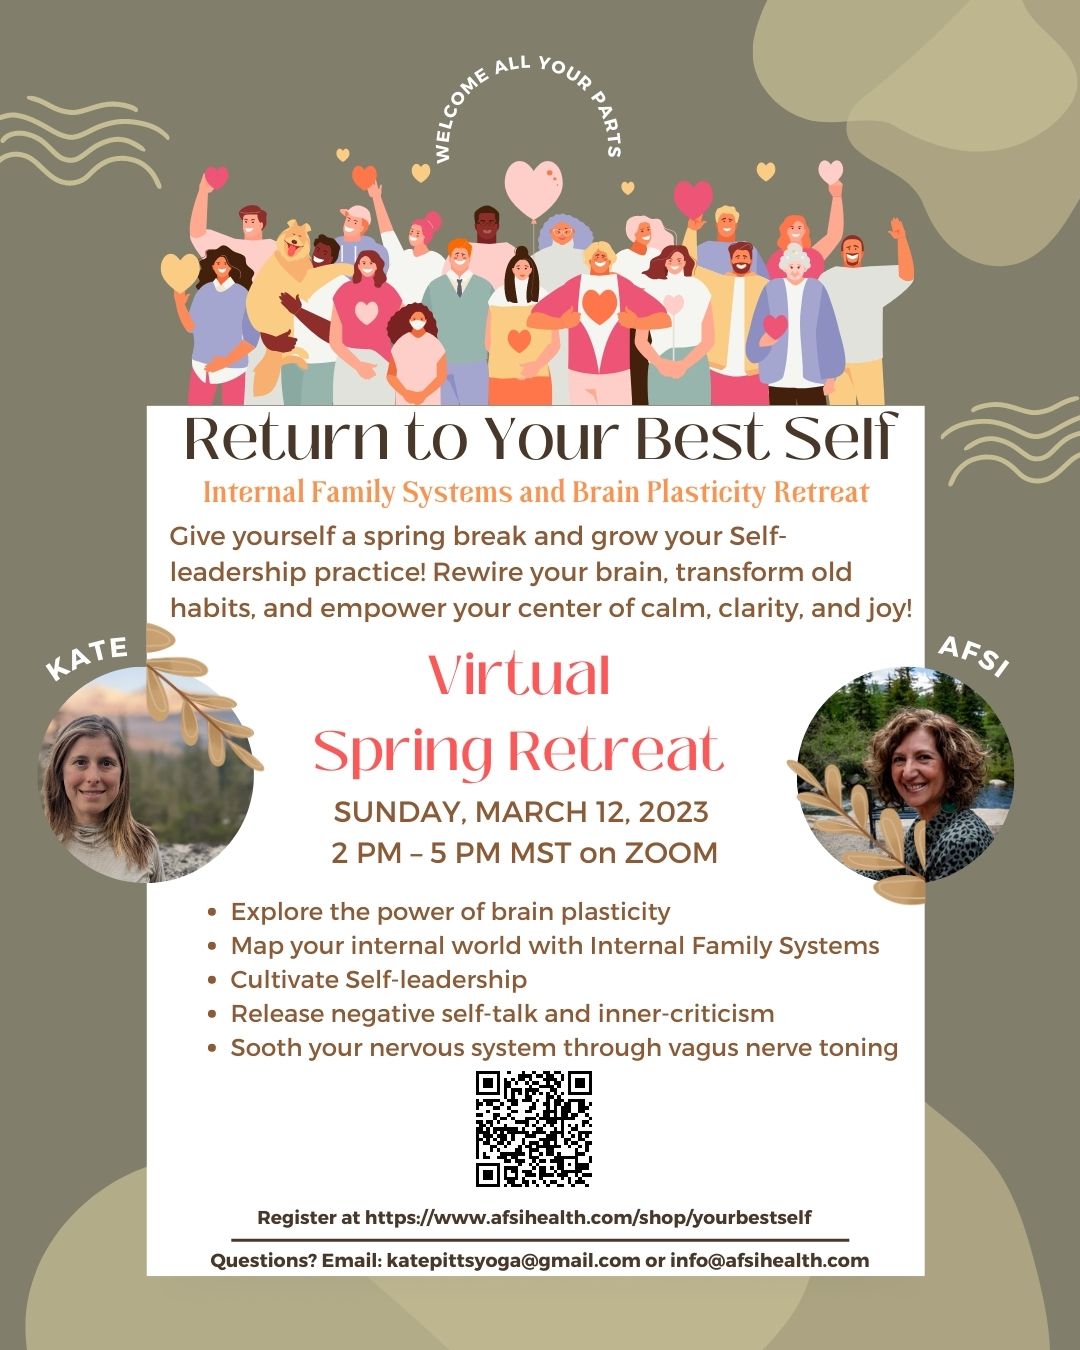 Return to Your Best Self : Internal Family Systems and Brain Plasticity Virtual Retreat